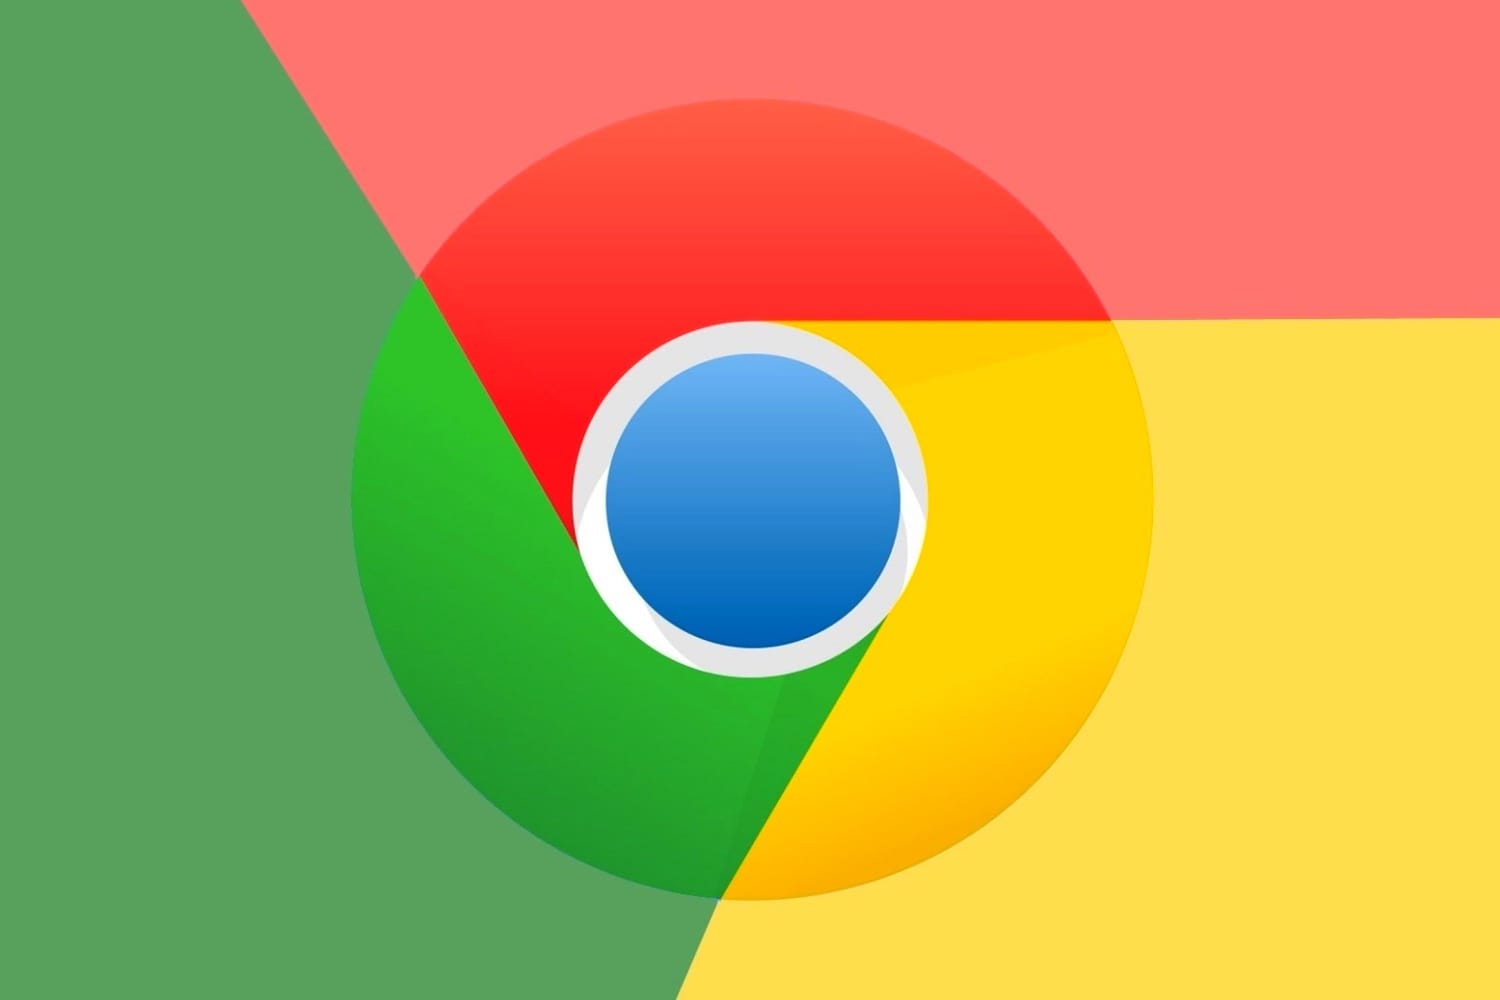 Google Chrome browser gets Tab Grouping feature with Grid View on Android